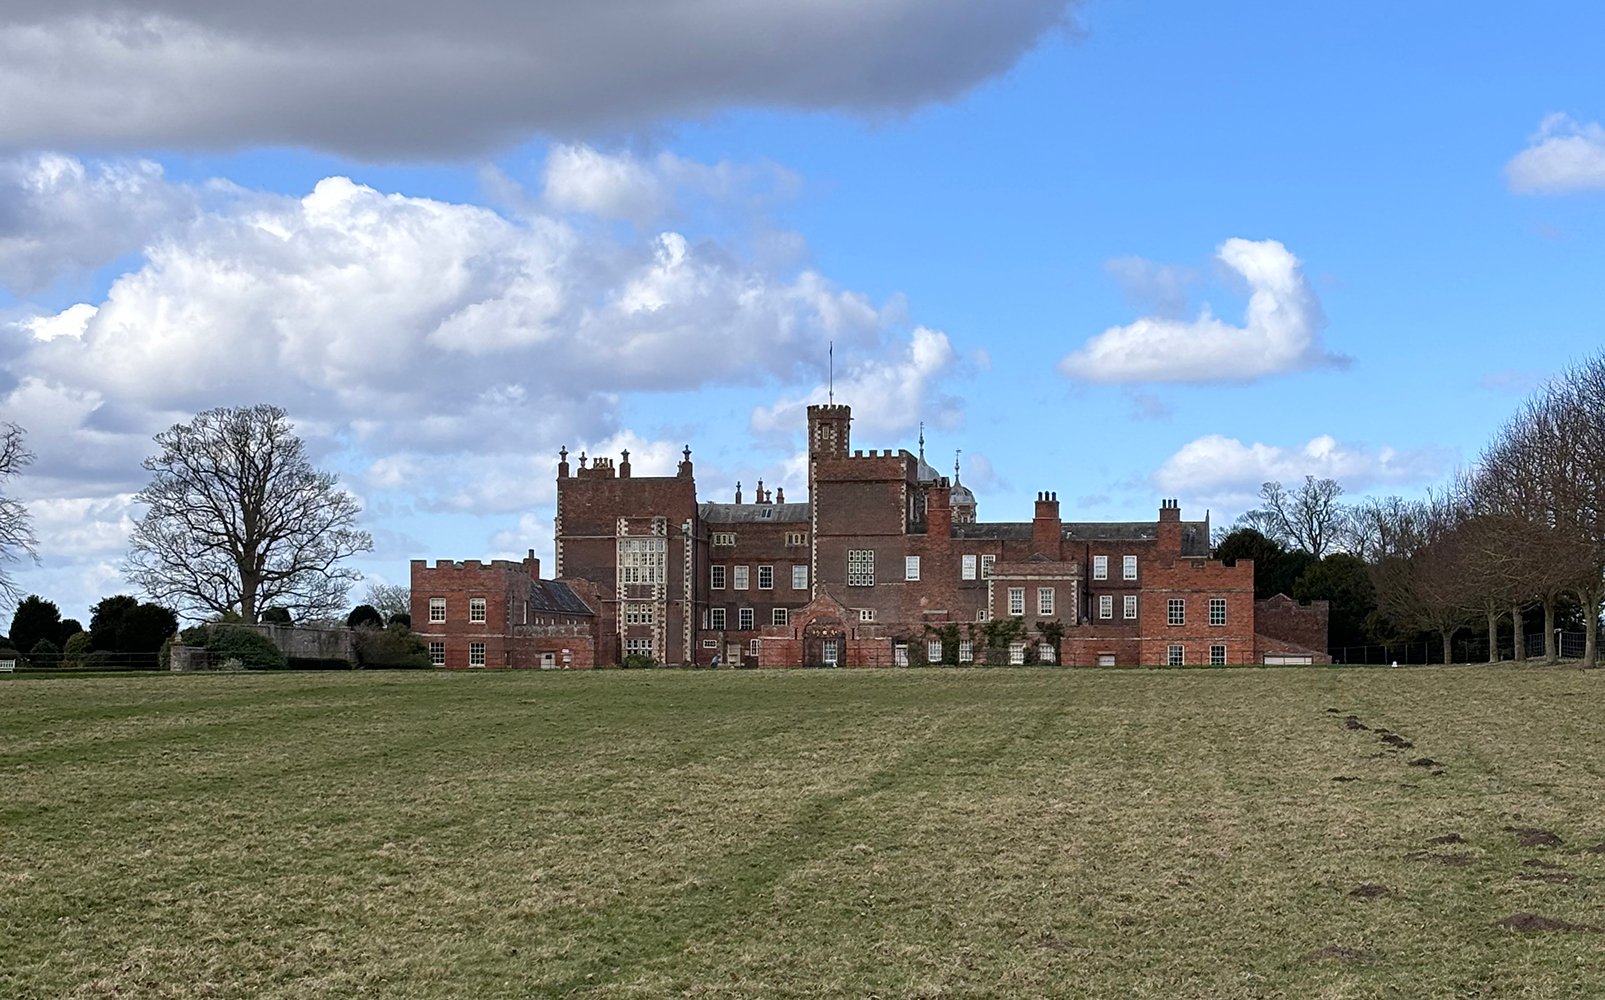 Image name burton constable hall red bricks blue sky and clouds east yorkshire the 11 image from the post A look at the history of Burton Constable Hall, with Dr Emma Wells in Yorkshire.com.